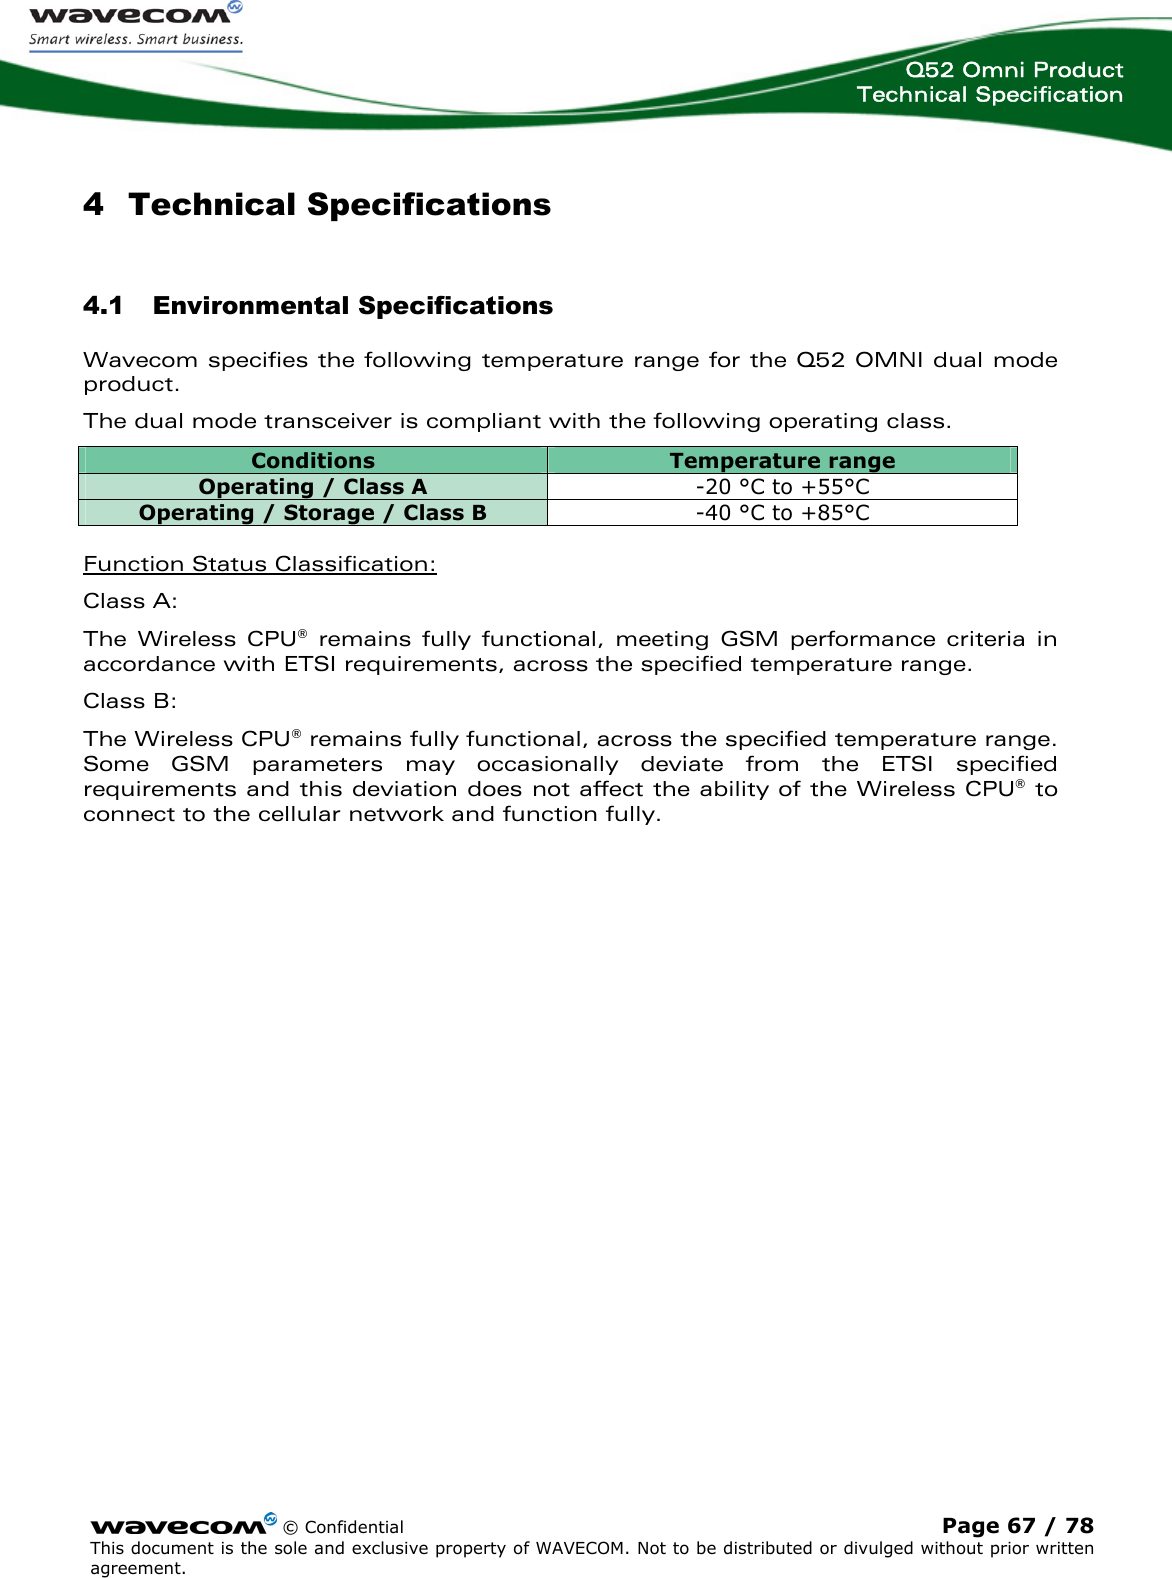  Q52 Omni Product Technical Specification    © Confidential Page 67 / 78 This document is the sole and exclusive property of WAVECOM. Not to be distributed or divulged without prior written agreement.  4 Technical Specifications 4.1 Environmental Specifications Wavecom specifies the following temperature range for the Q52 OMNI dual mode product. The dual mode transceiver is compliant with the following operating class. Conditions  Temperature range Operating / Class A  -20 °C to +55°C Operating / Storage / Class B   -40 °C to +85°C  Function Status Classification: Class A:    The Wireless CPU® remains fully functional, meeting GSM performance criteria in accordance with ETSI requirements, across the specified temperature range.   Class B:    The Wireless CPU® remains fully functional, across the specified temperature range. Some GSM parameters may occasionally deviate from the ETSI specified requirements and this deviation does not affect the ability of the Wireless CPU® to connect to the cellular network and function fully. 